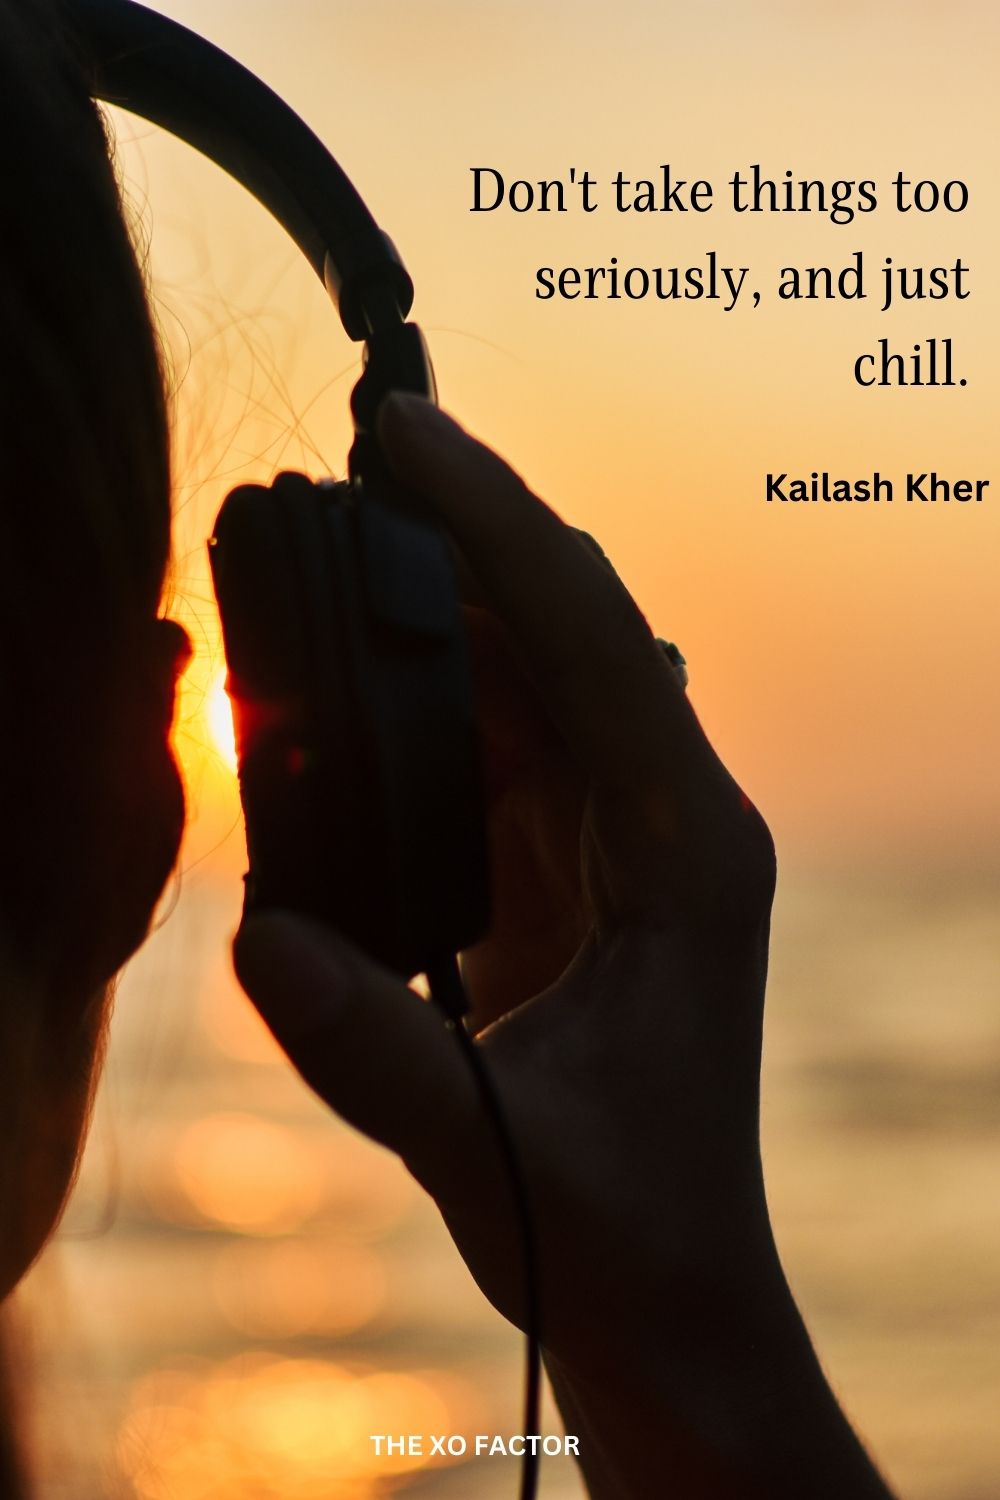 Don't take things too seriously, and just chill.
Kailash Kher